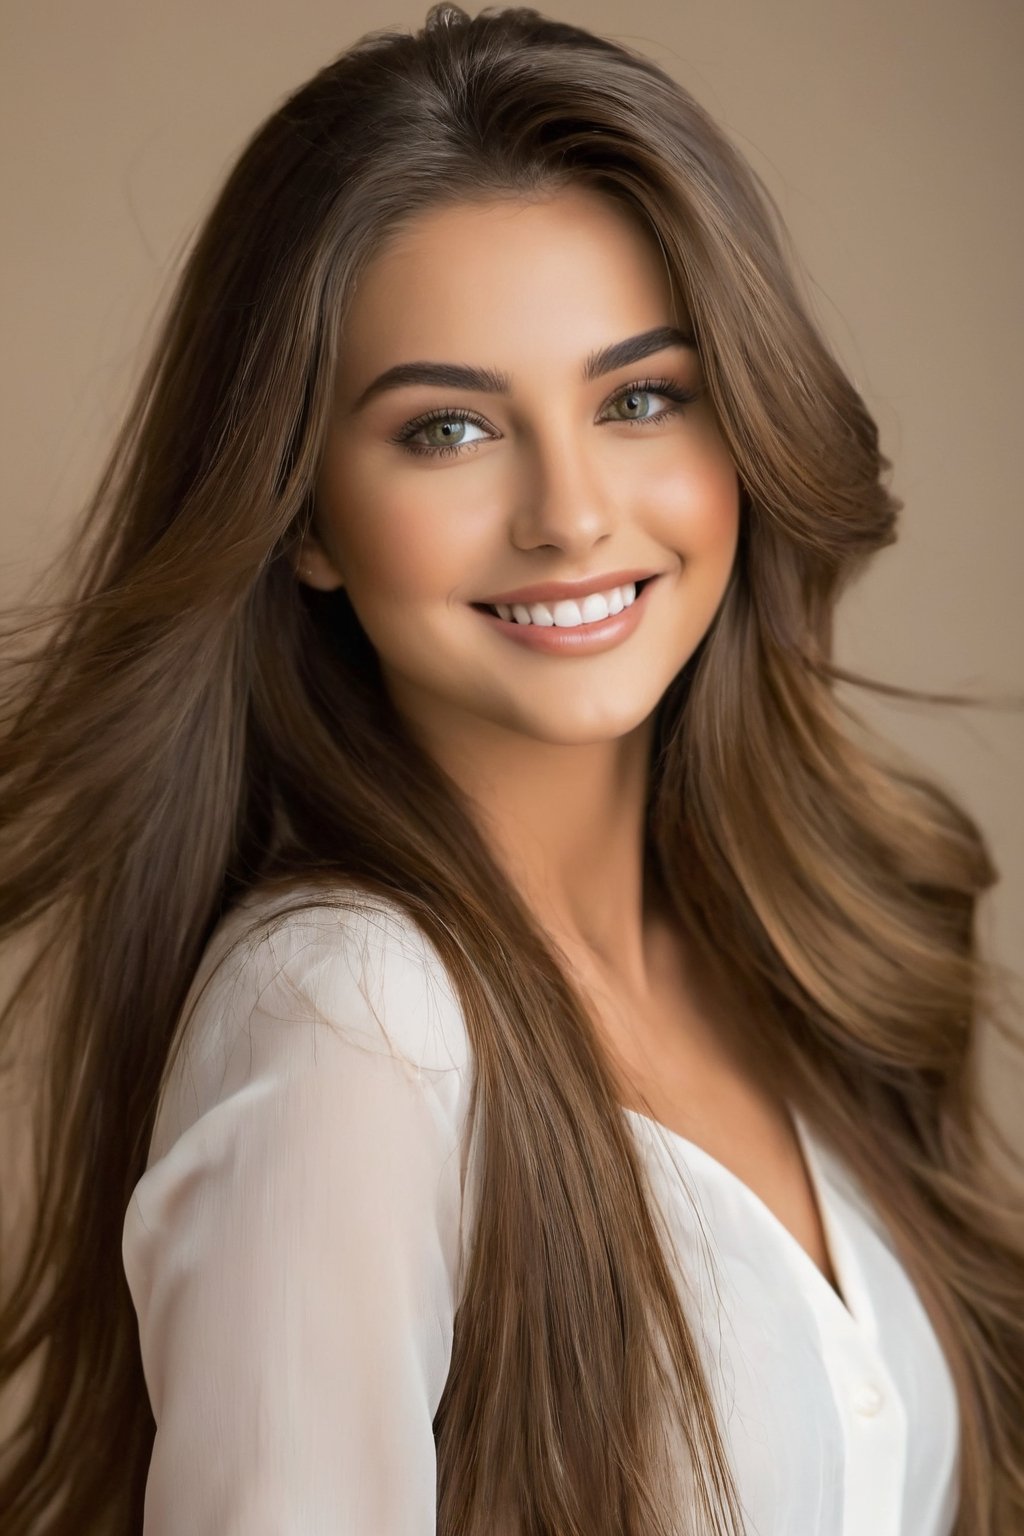 She is a beautiful girl with long flowing hair, captivating eyes, and a radiant smile that lights up the room. Her graceful movements and elegant demeanor exude charm and sophistication. People are drawn to her magnetic presence and effortless beauty.